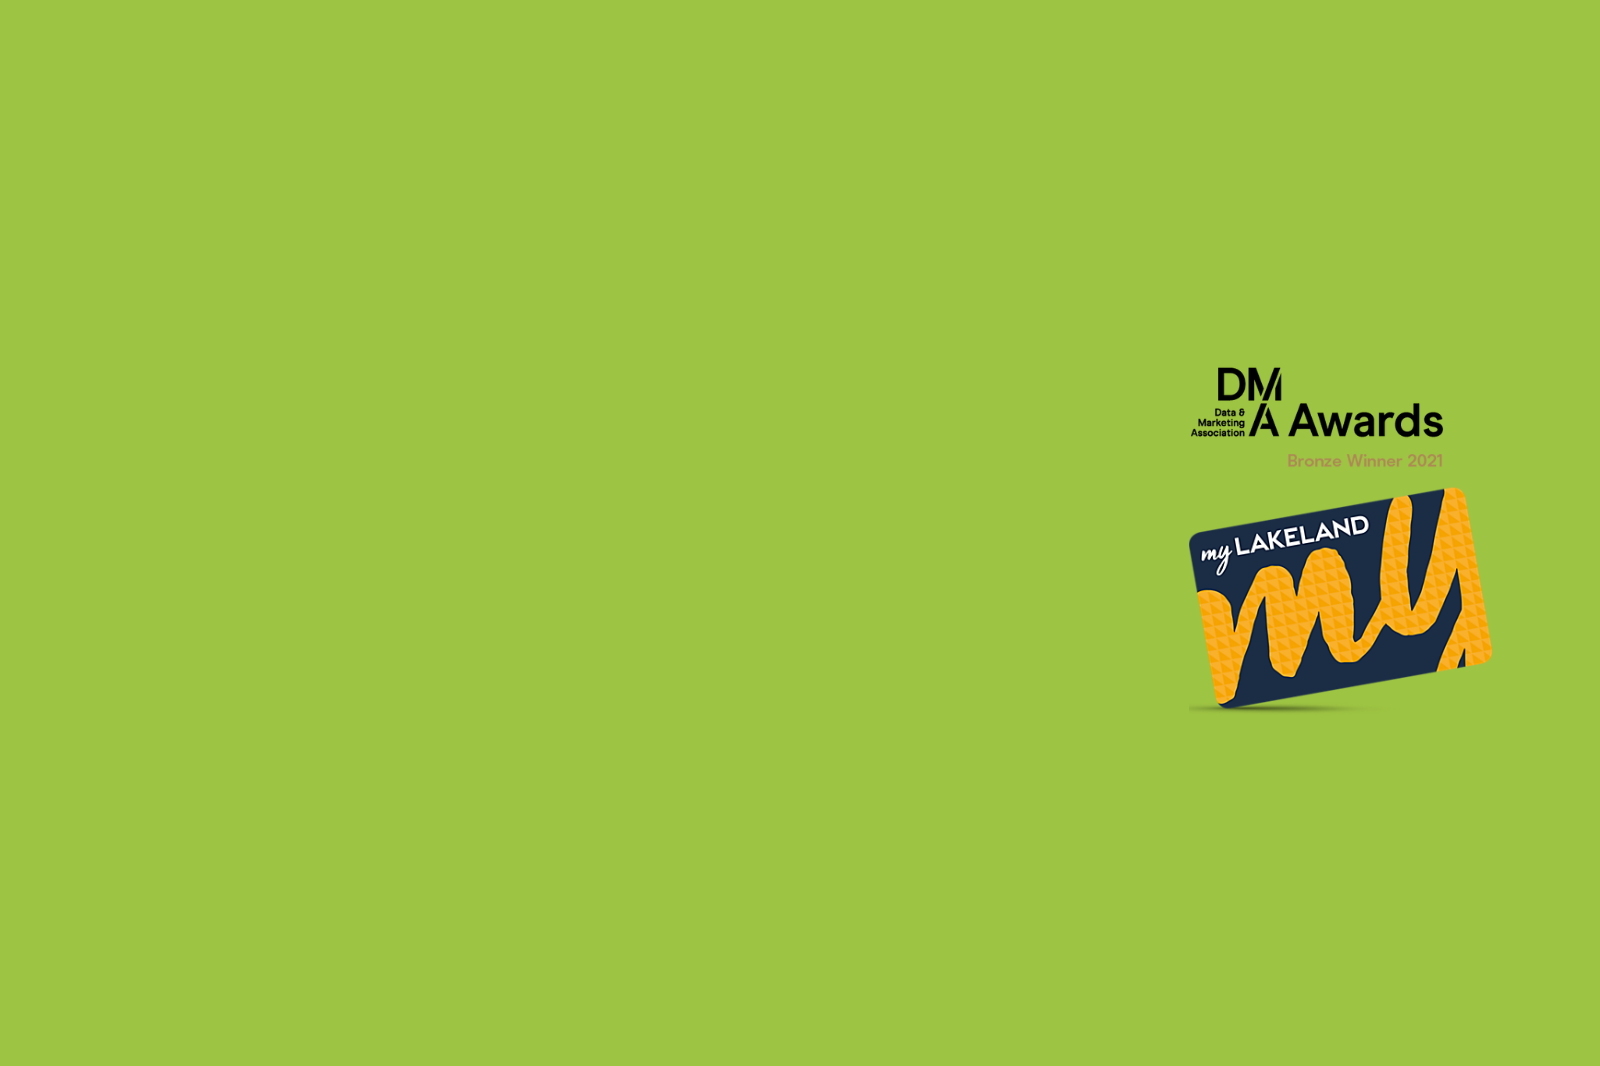 The logo for the DMA Awards on a green background highlighting Bronze Winners.